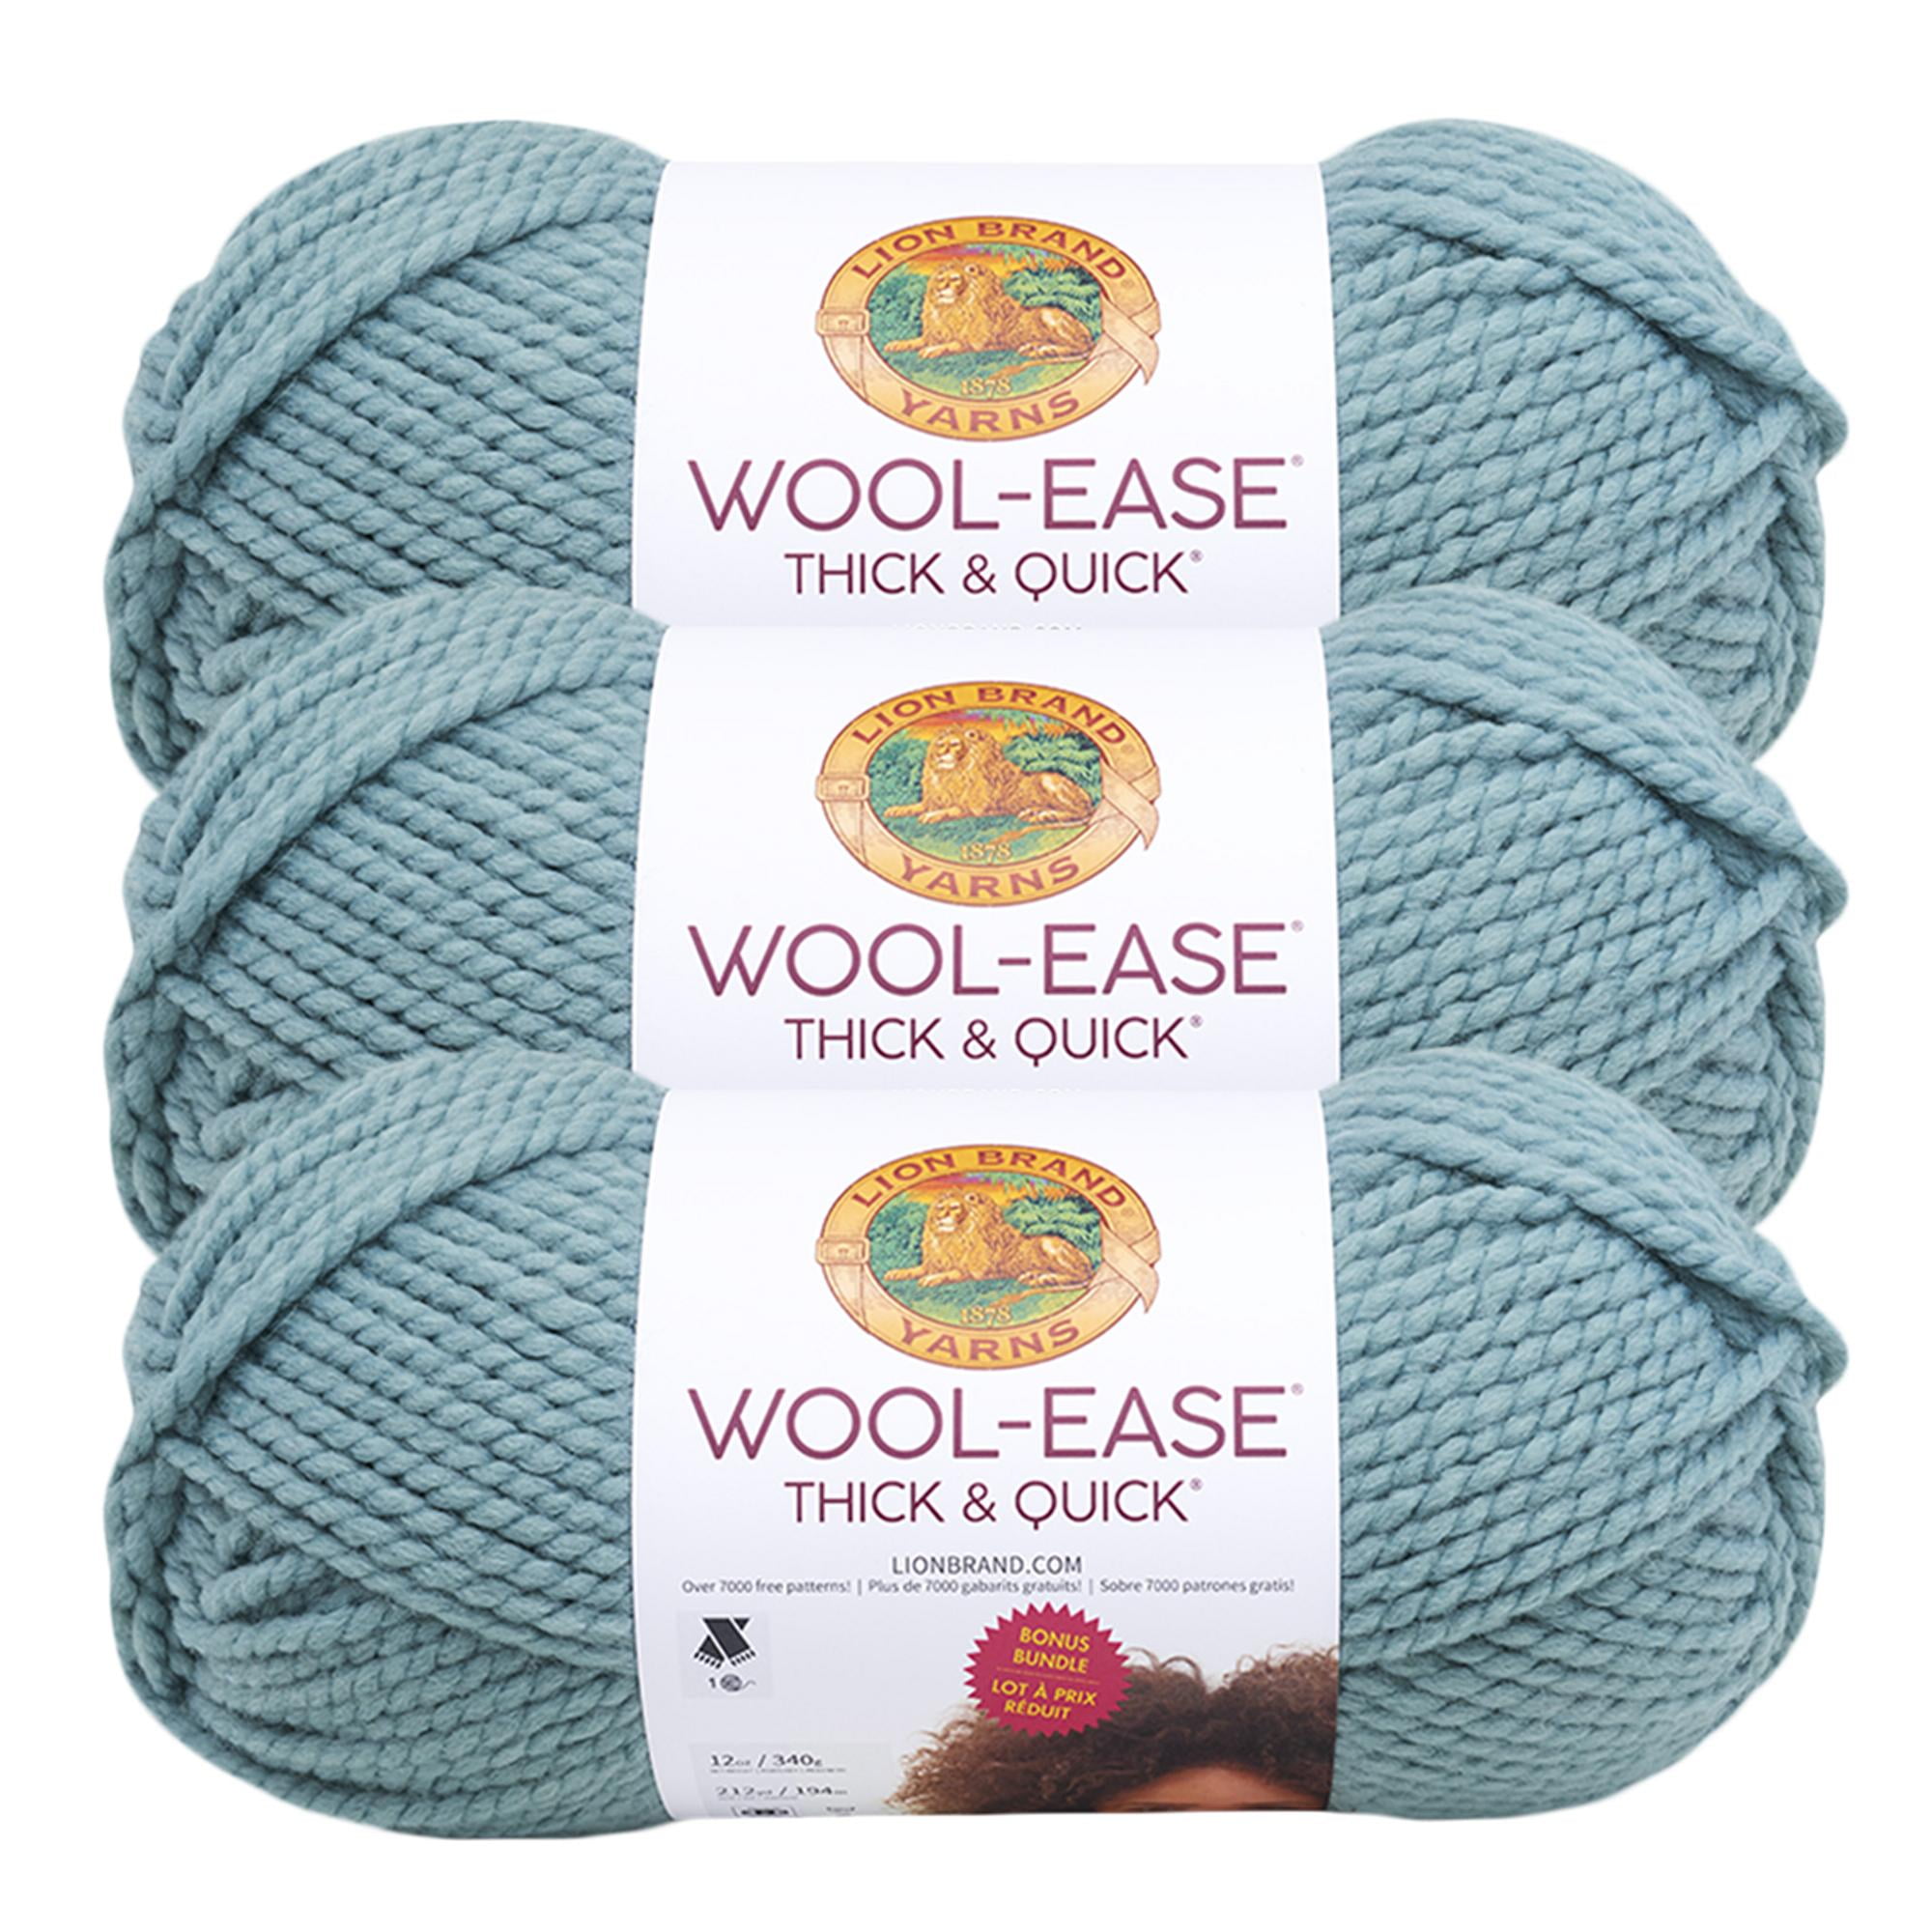 Lion Brand Yarn lion brand yarn wool-ease thick & quick yarn, soft and  bulky yarn for knitting, crocheting, and crafting, 3 pack, blossom